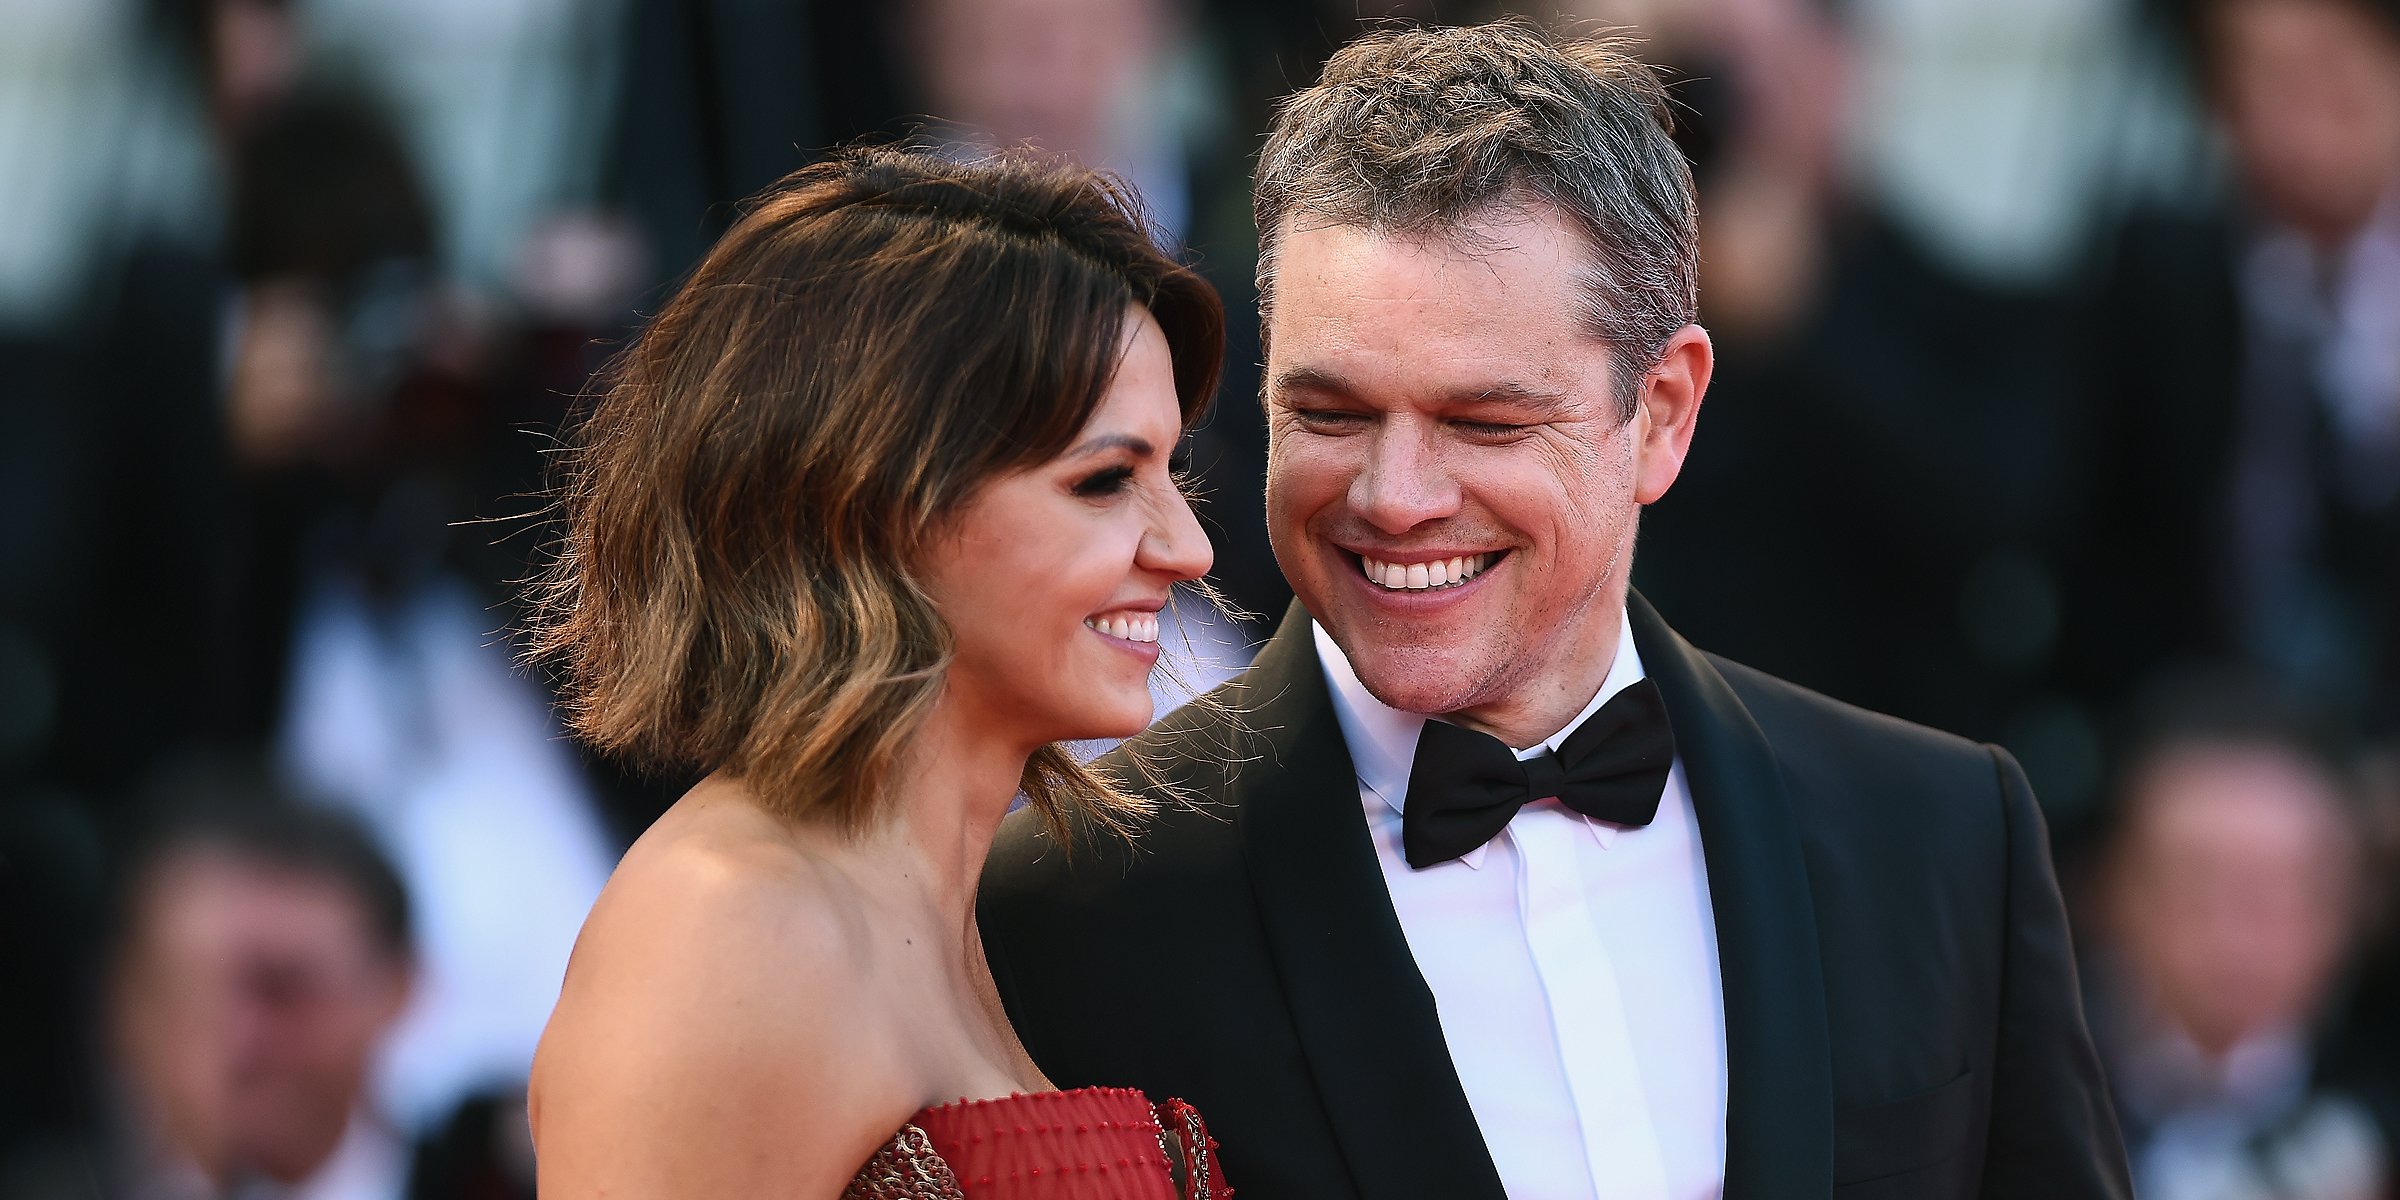 Matt Damon and his wife Luciana Barroso | Source: Getty Images